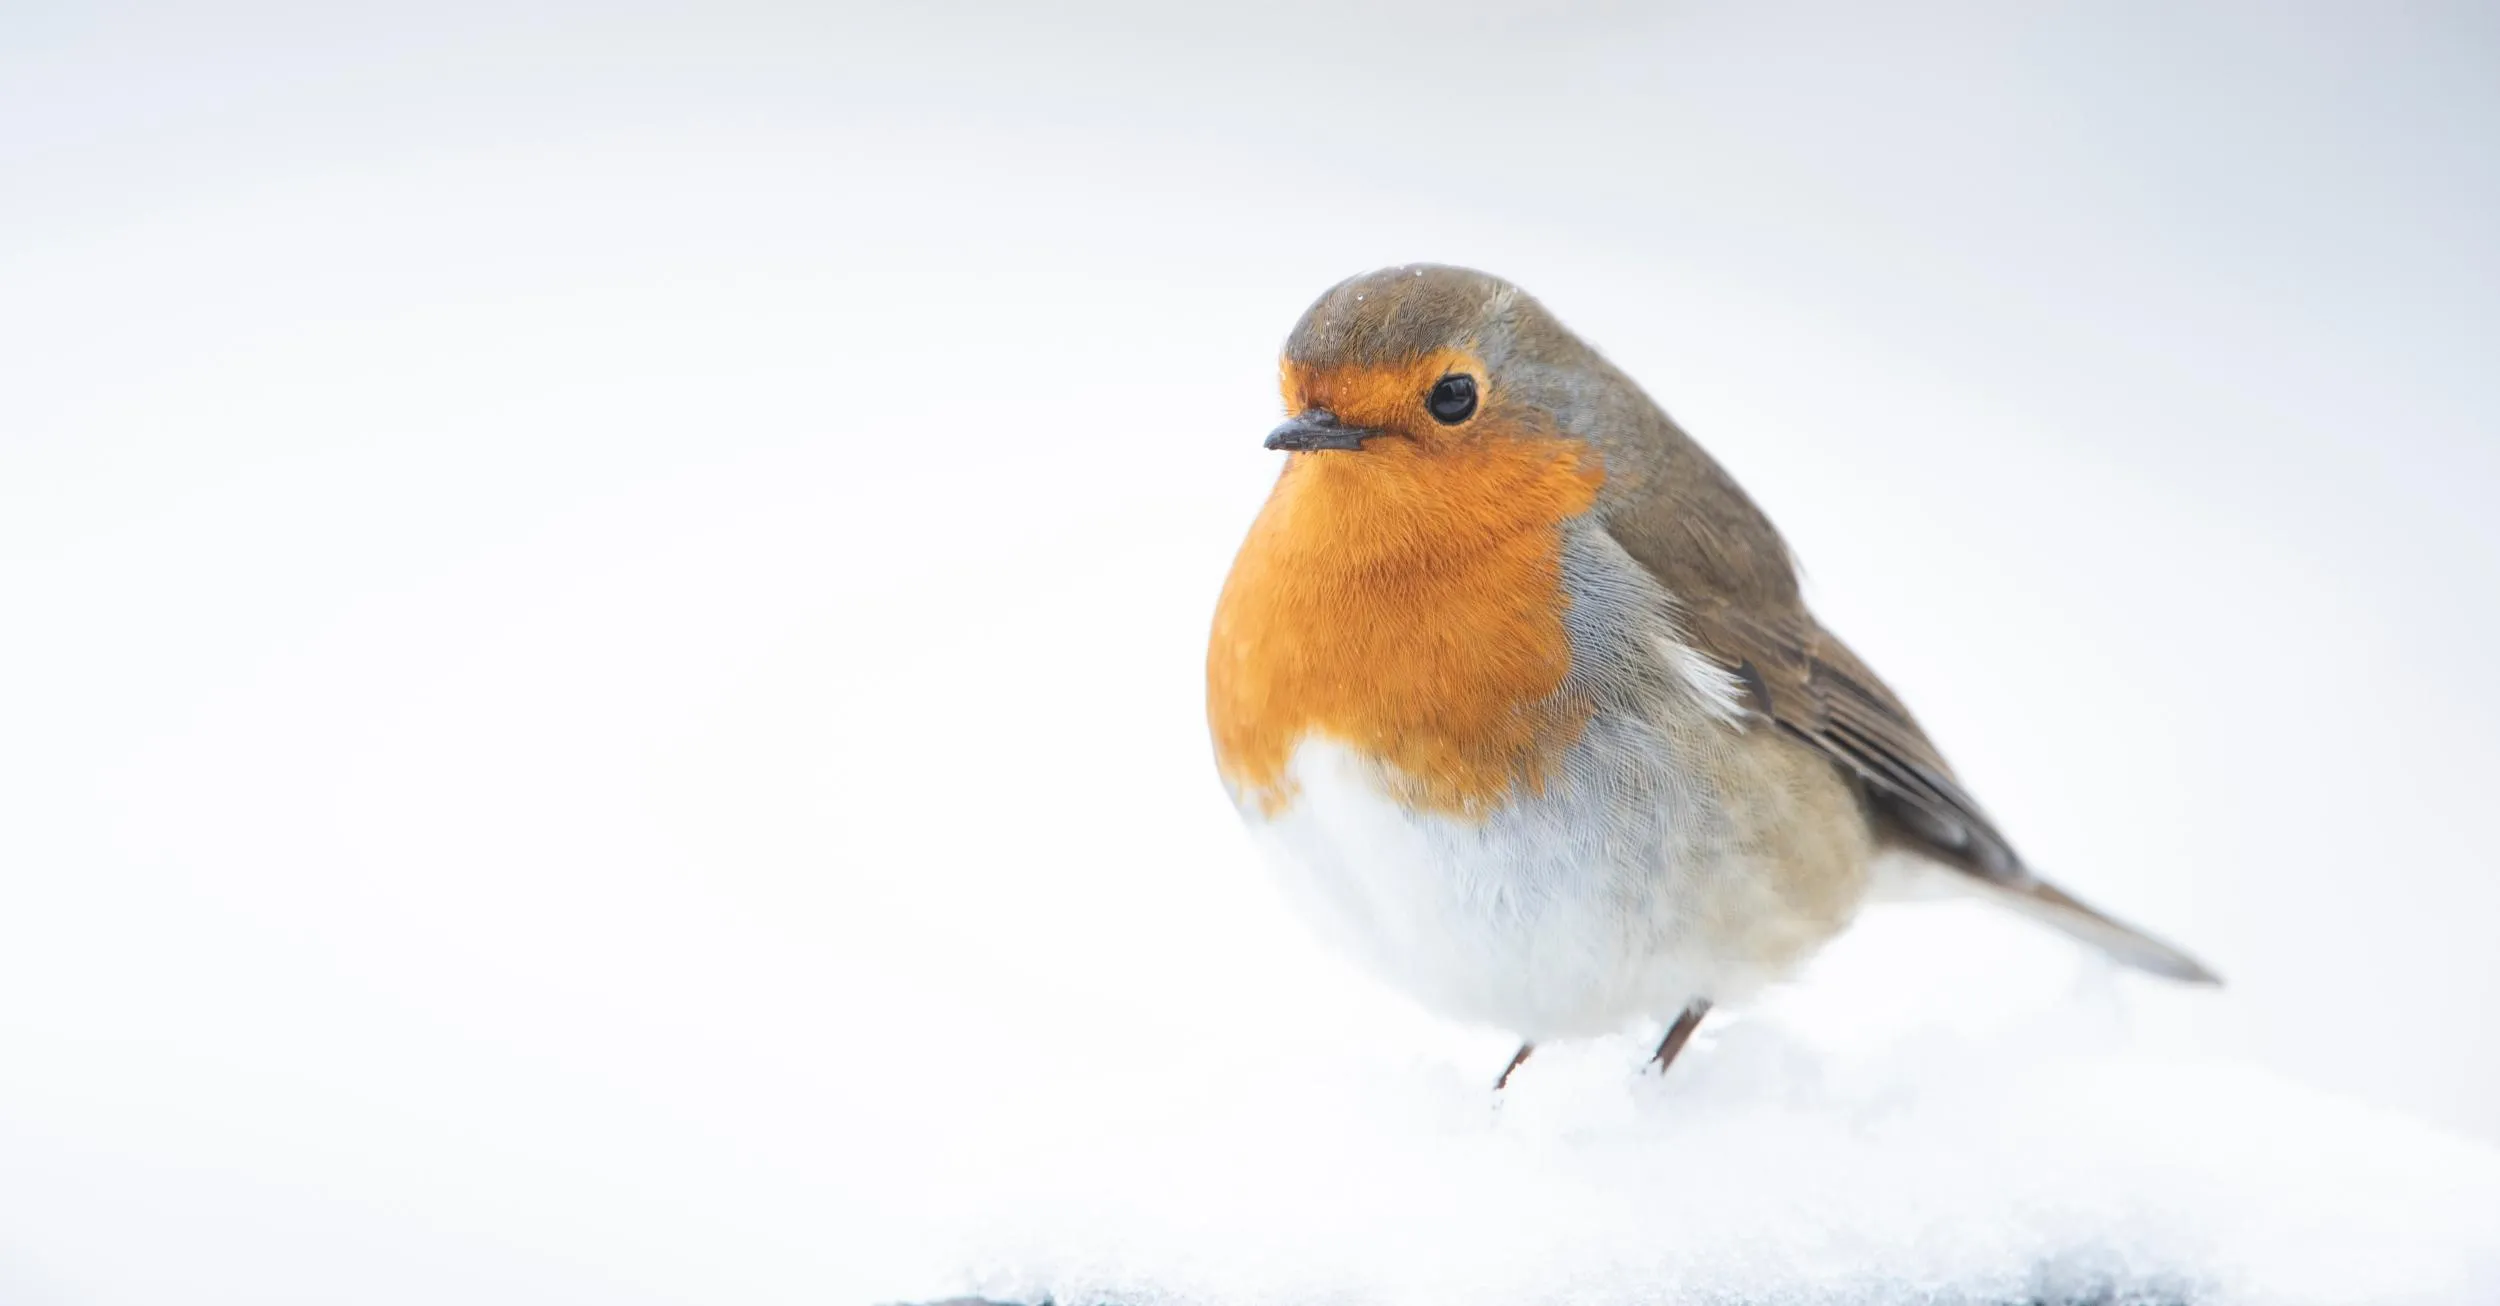 A Robin stood on a small mound of snow.